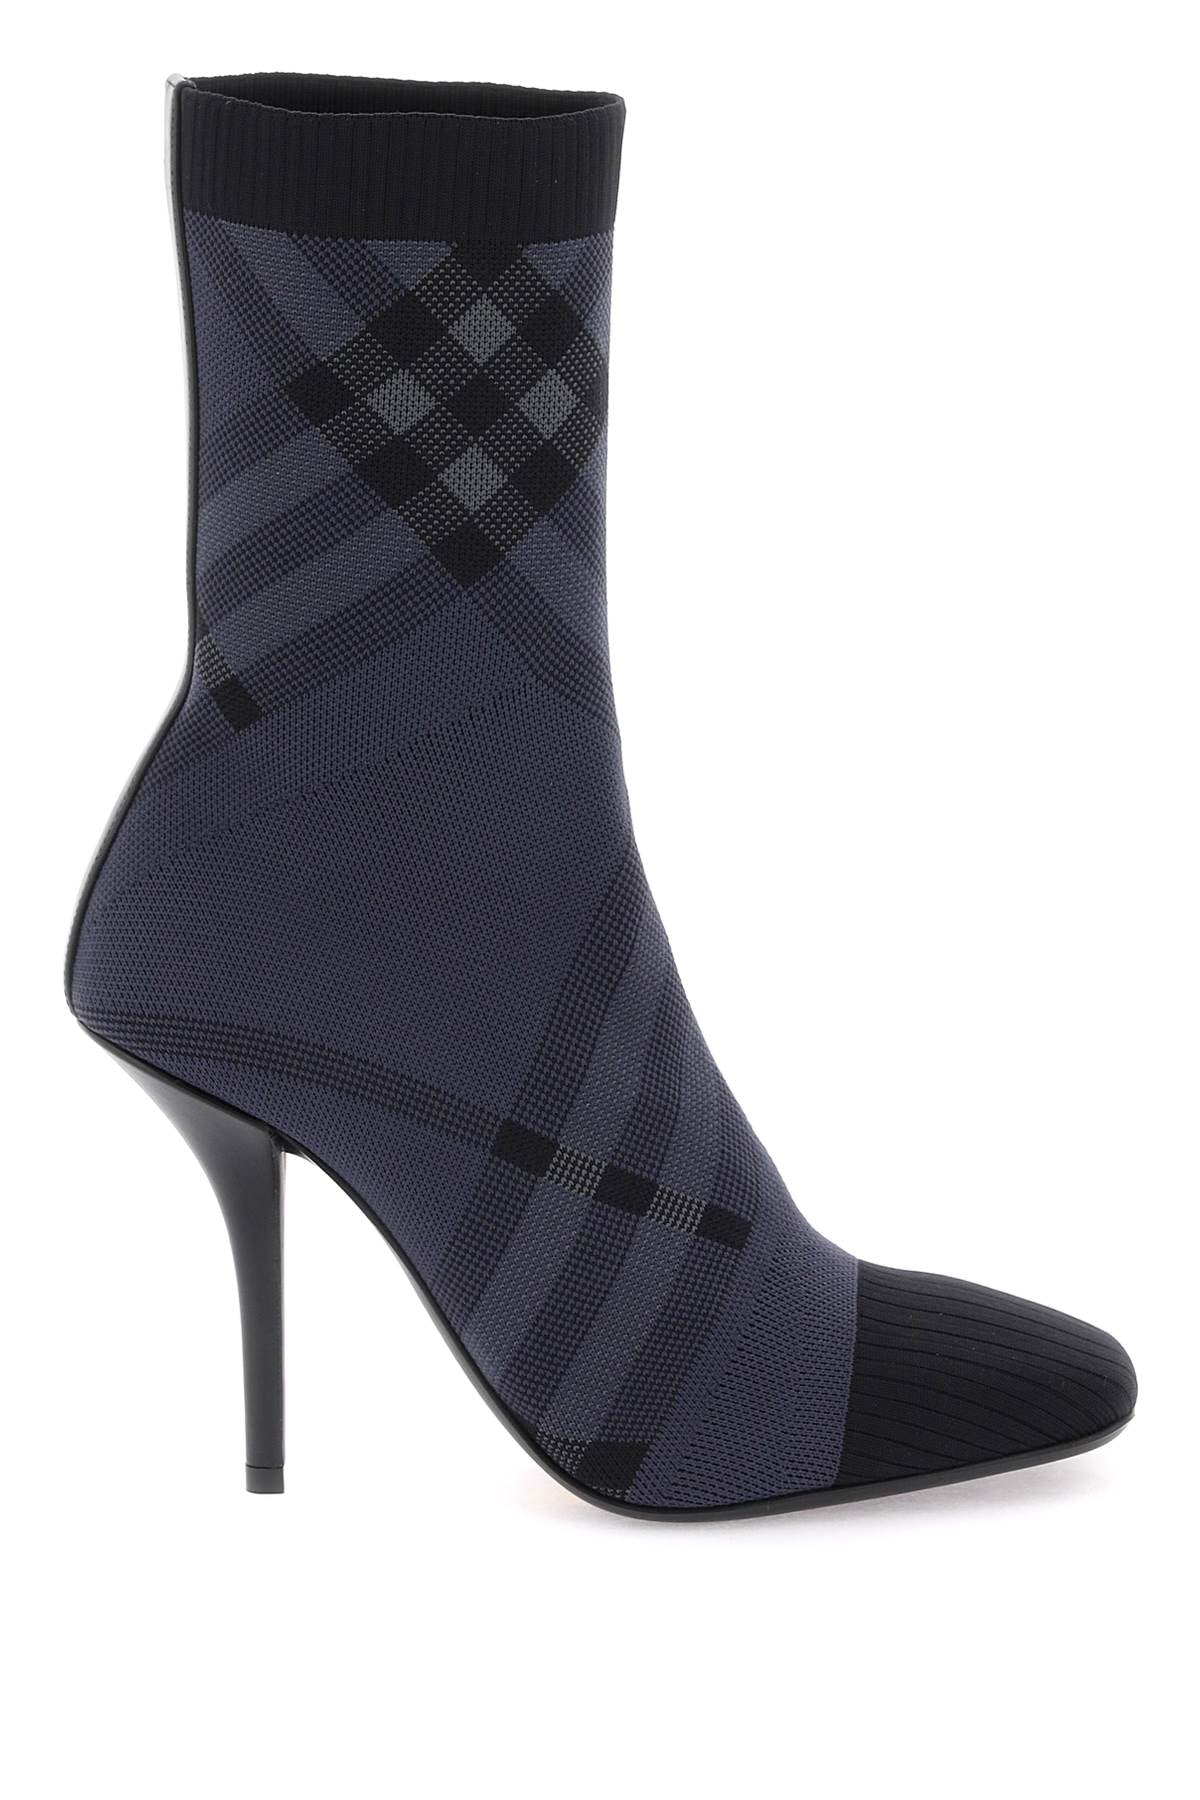 Burberry Burberry Check Knit Ankle Boots-Burberry-Urbanheer